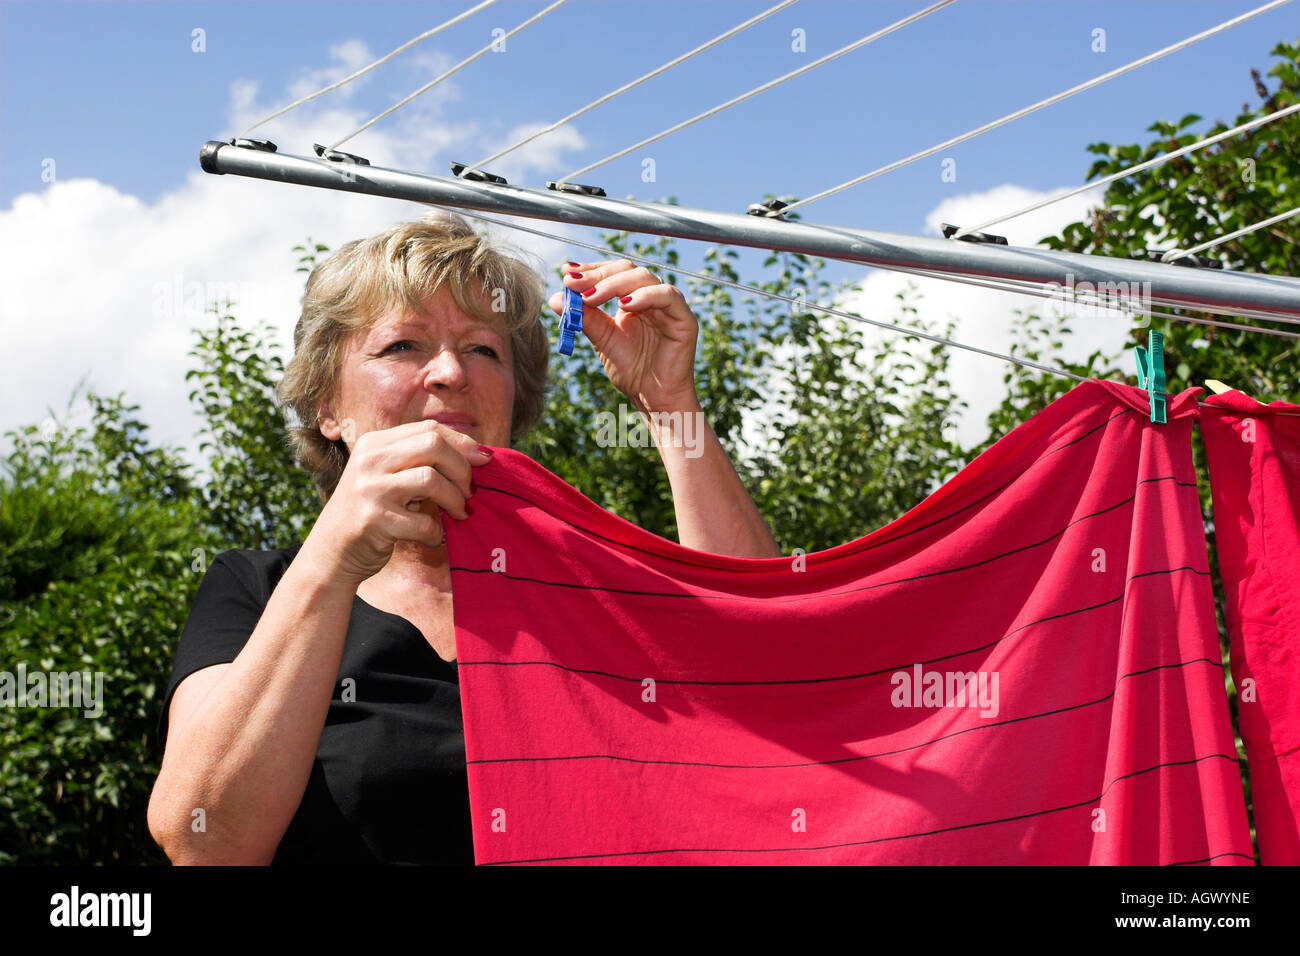 Woman hanging up washing on line in garden. Stock Photo